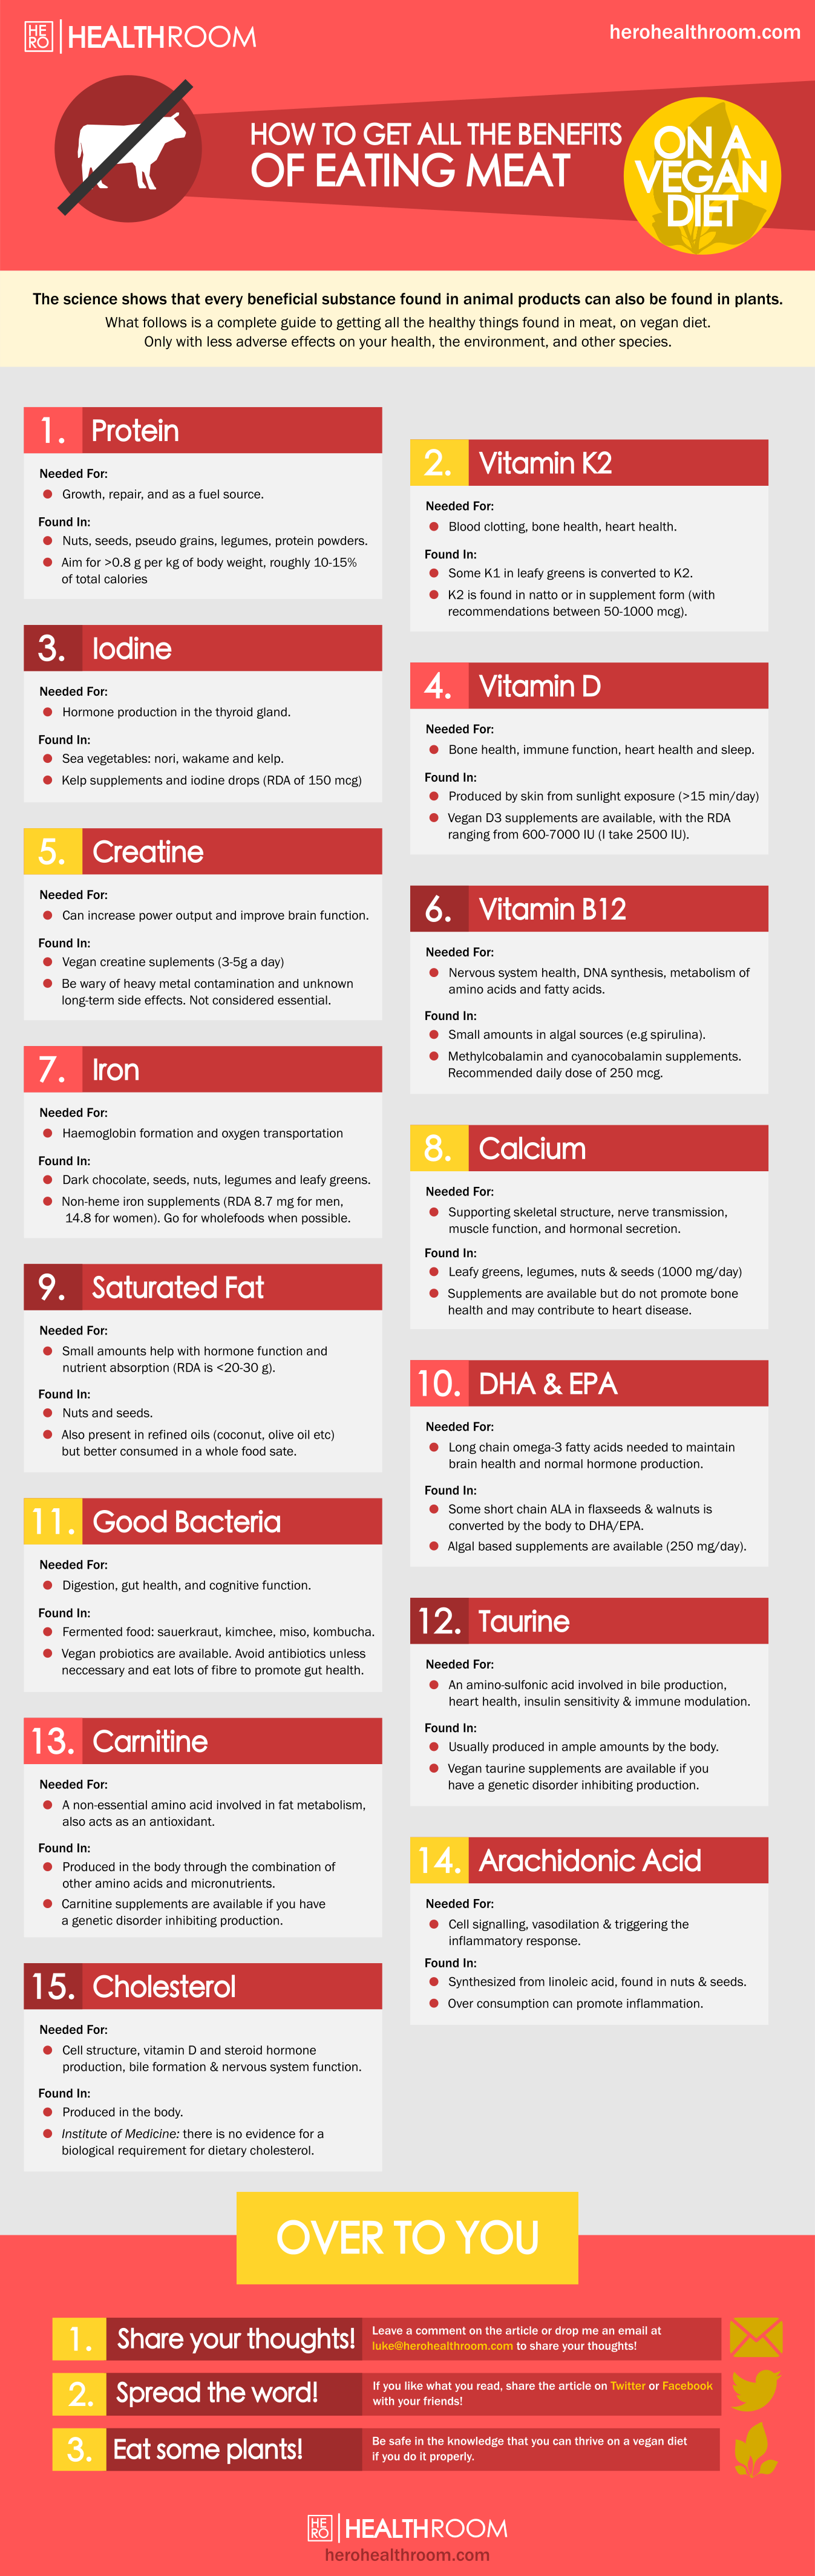 Get All The Benefits of Eating Meat On A Vegan Diet Infographic